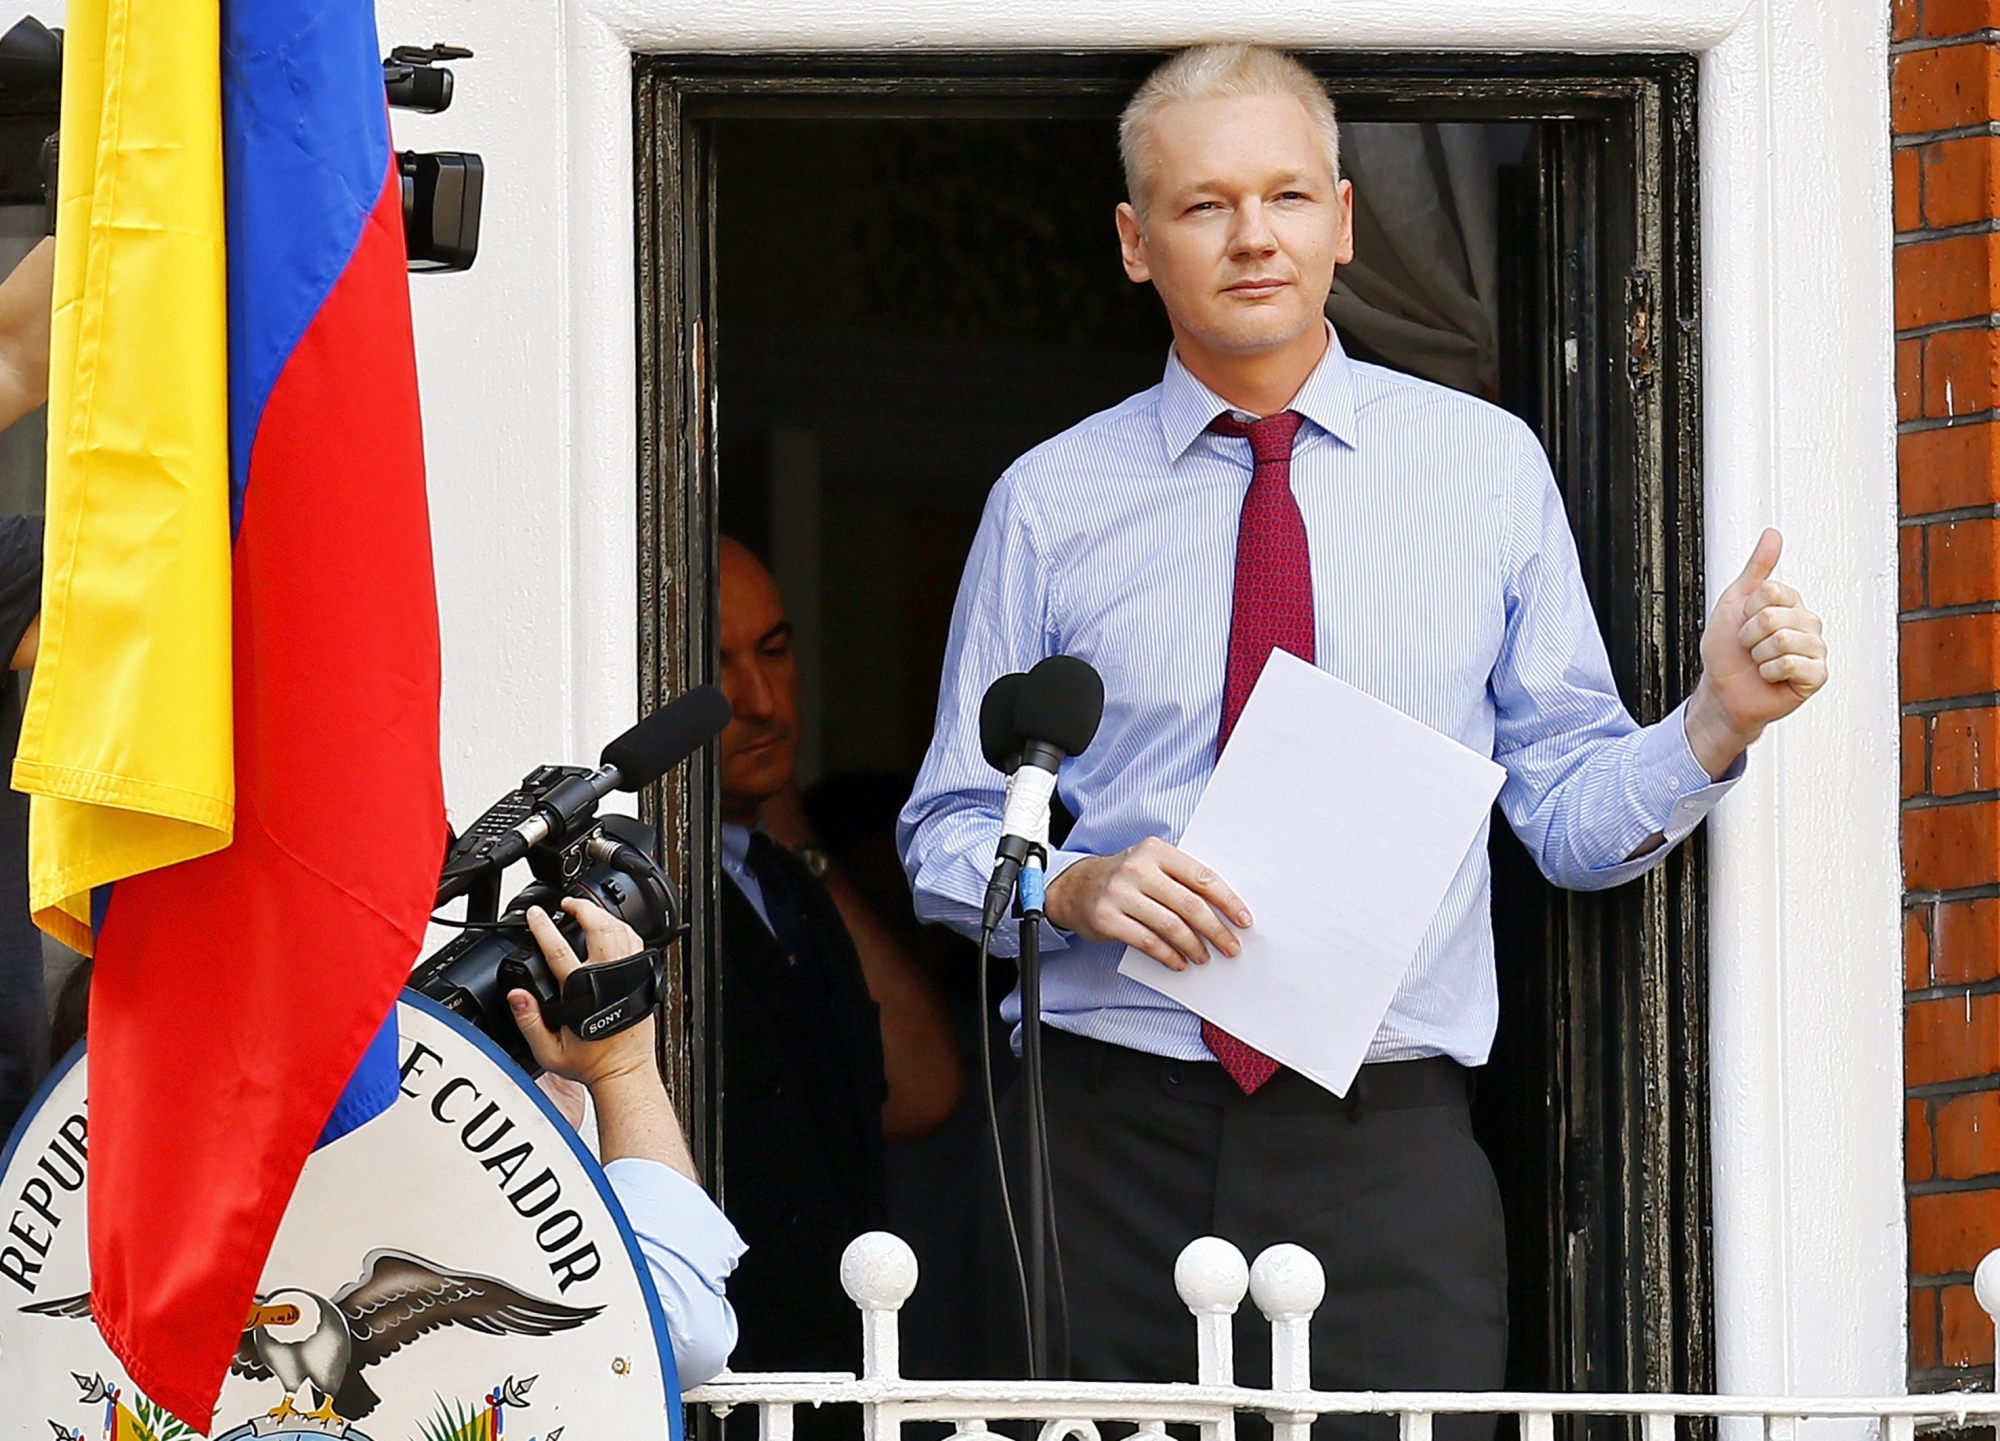 epa05973684 (FILE) - Wikileaks founder Julian Assange gives a thumbs up prior to delivering a statement on the balcony inside the Ecuador Embassy where he has sought political asylum in London, Britain, 19 August 2012(reissued 19 May 2017). According to a statement by the Swedish prosecutor's office on 19 May 2017, Sweden has dropped a rape probe against WikiLeaks founder Assange.  EPA/KERIM OKTEN (FILE) BRITAIN WIKILEAKS ASSANGE